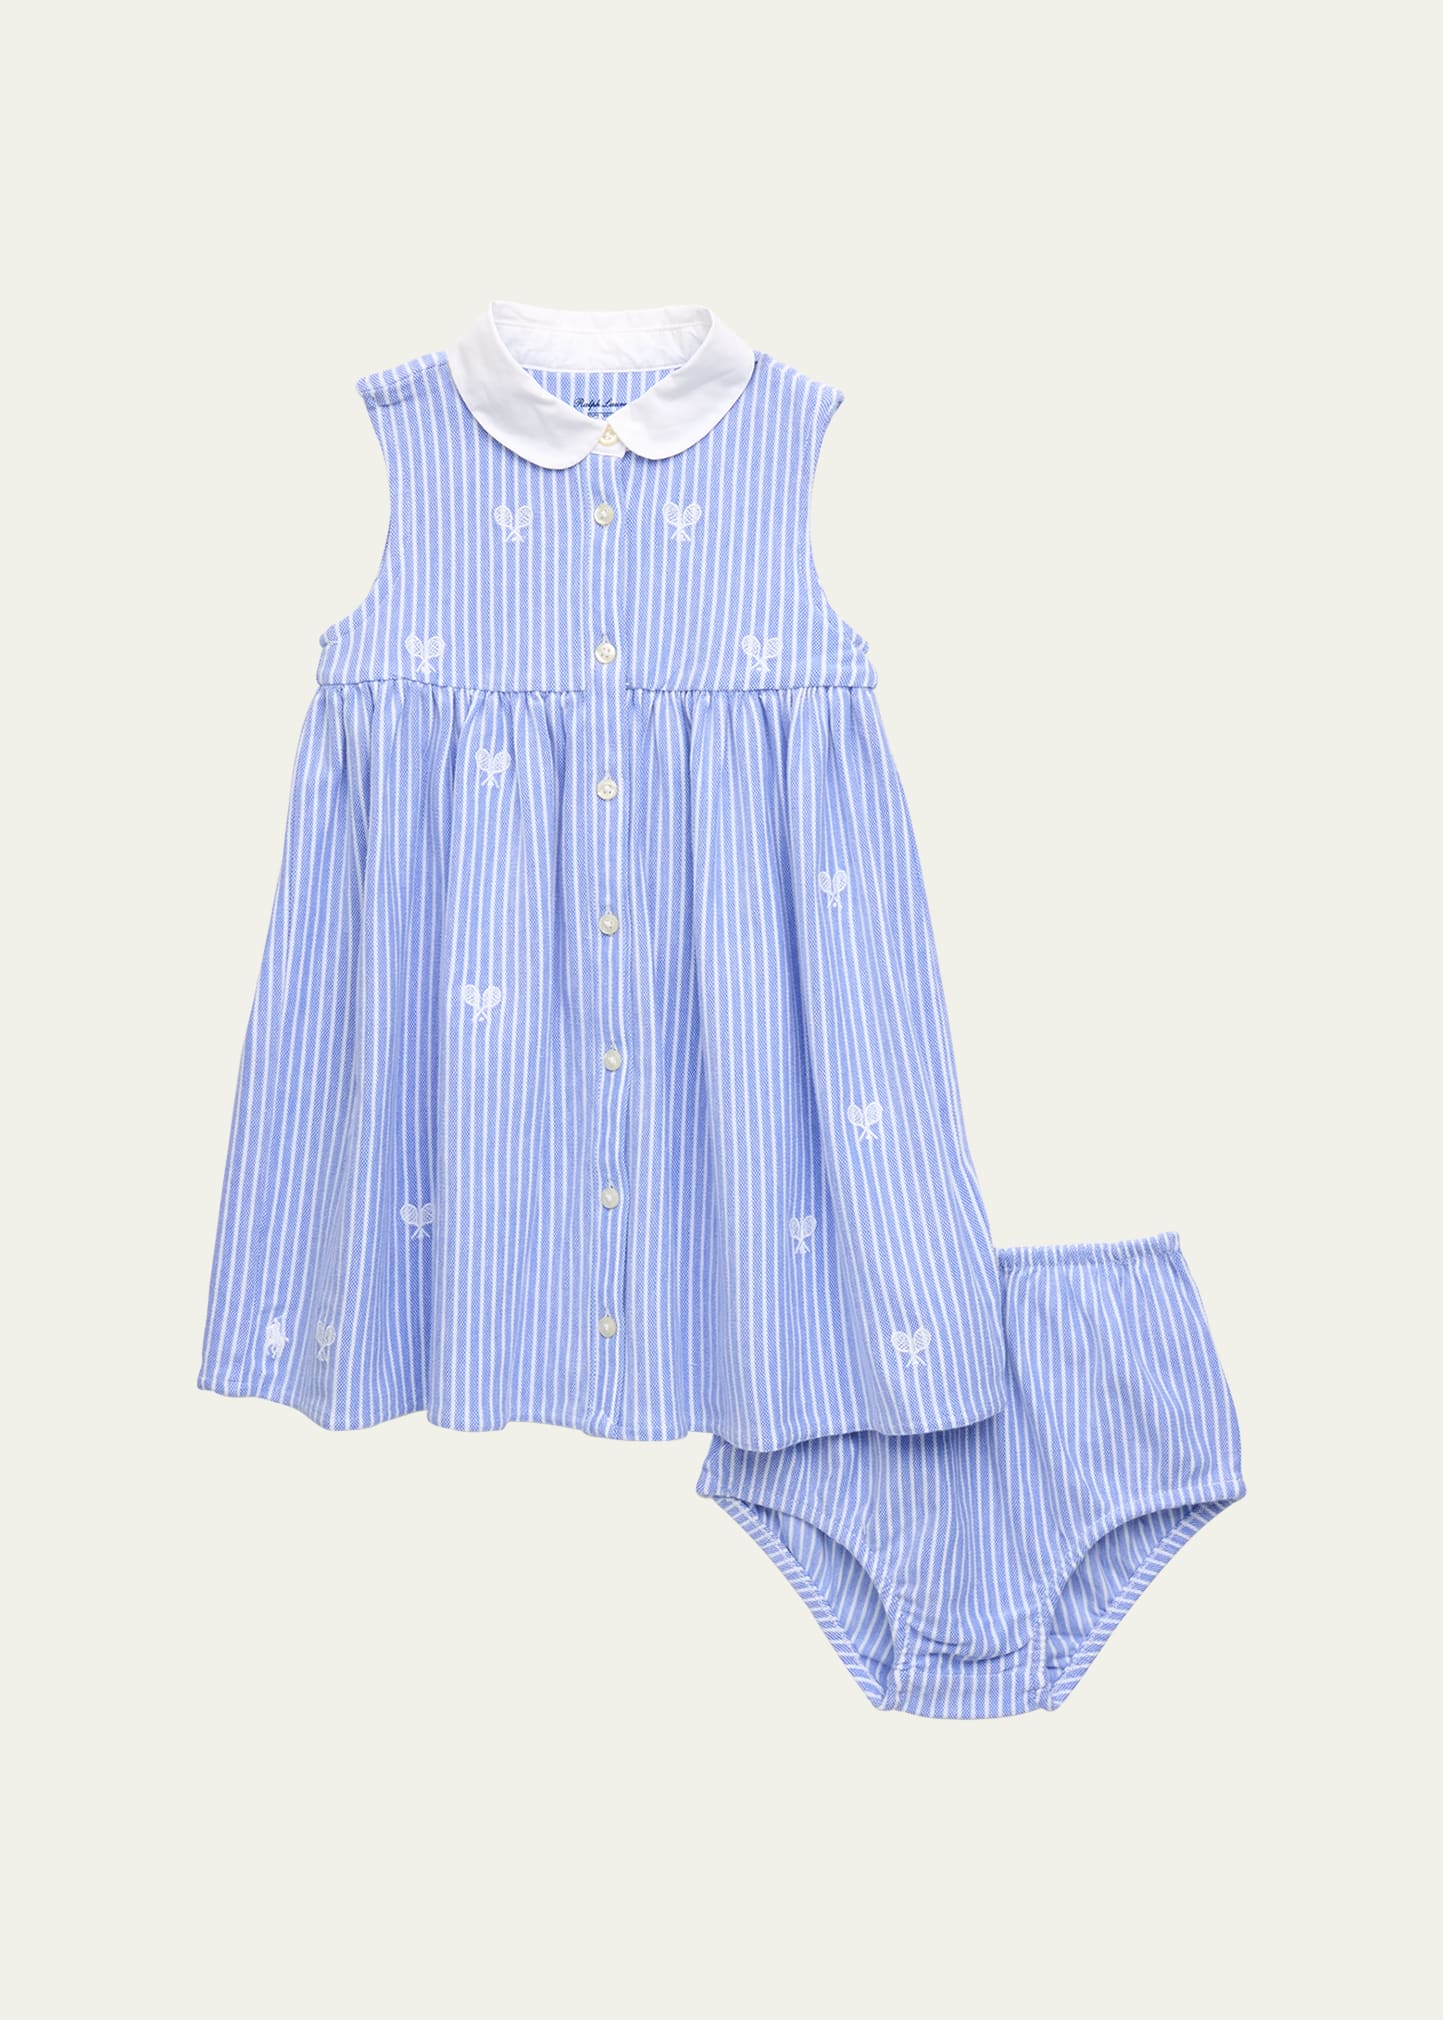 RALPH LAUREN GIRL'S EMBROIDERED PINSTRIPE COTTON MESH DRESS WITH BLOOMERS